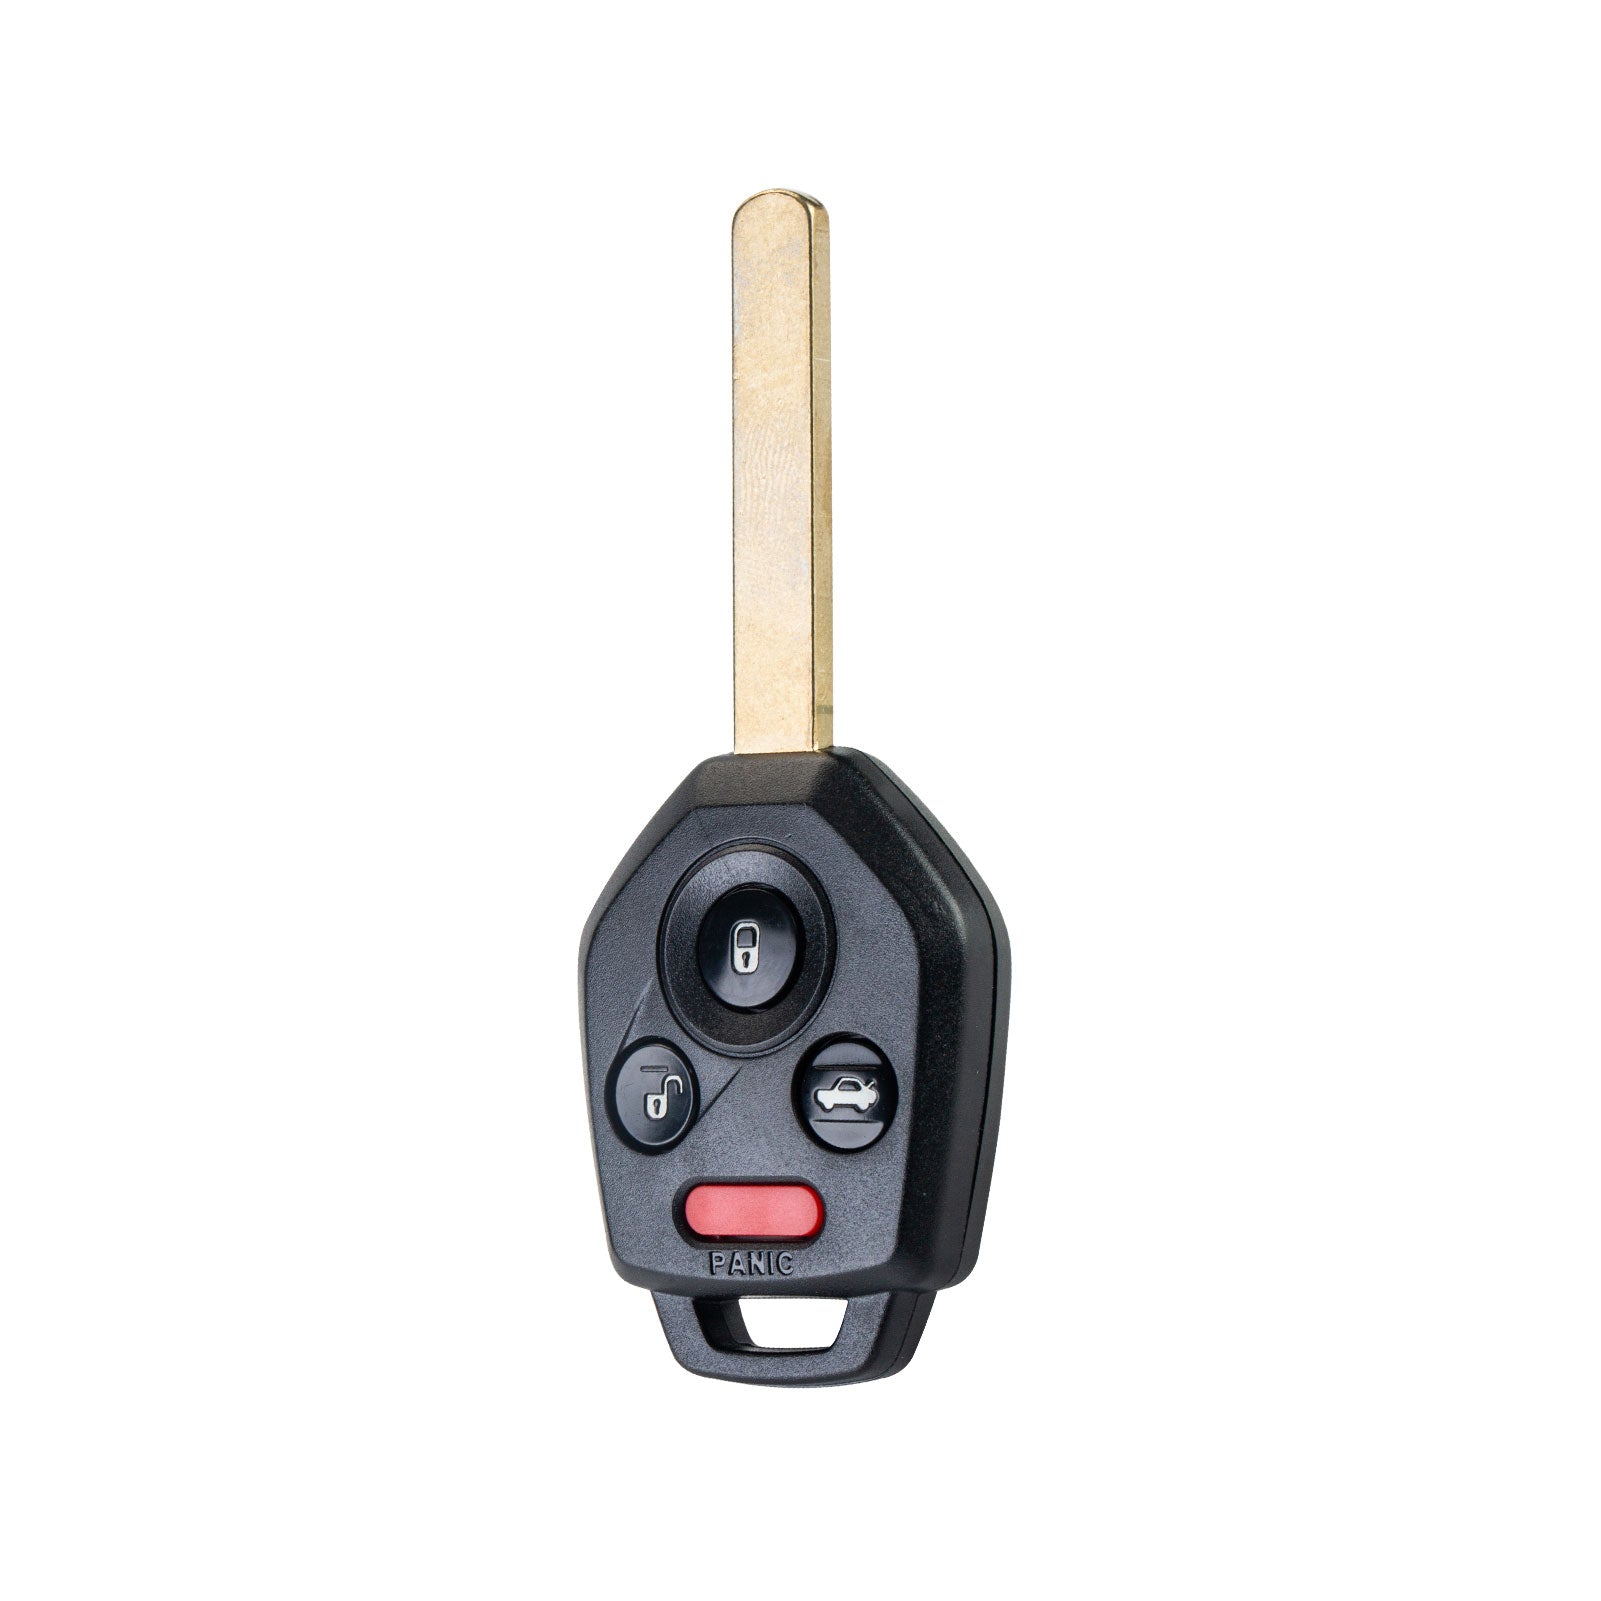 Keyless Entry Remote Control 433MHZ Replacement for 2011-2014 Subaru Outback Legacy CWTWB1U811 G CHIP   KR-G4RD